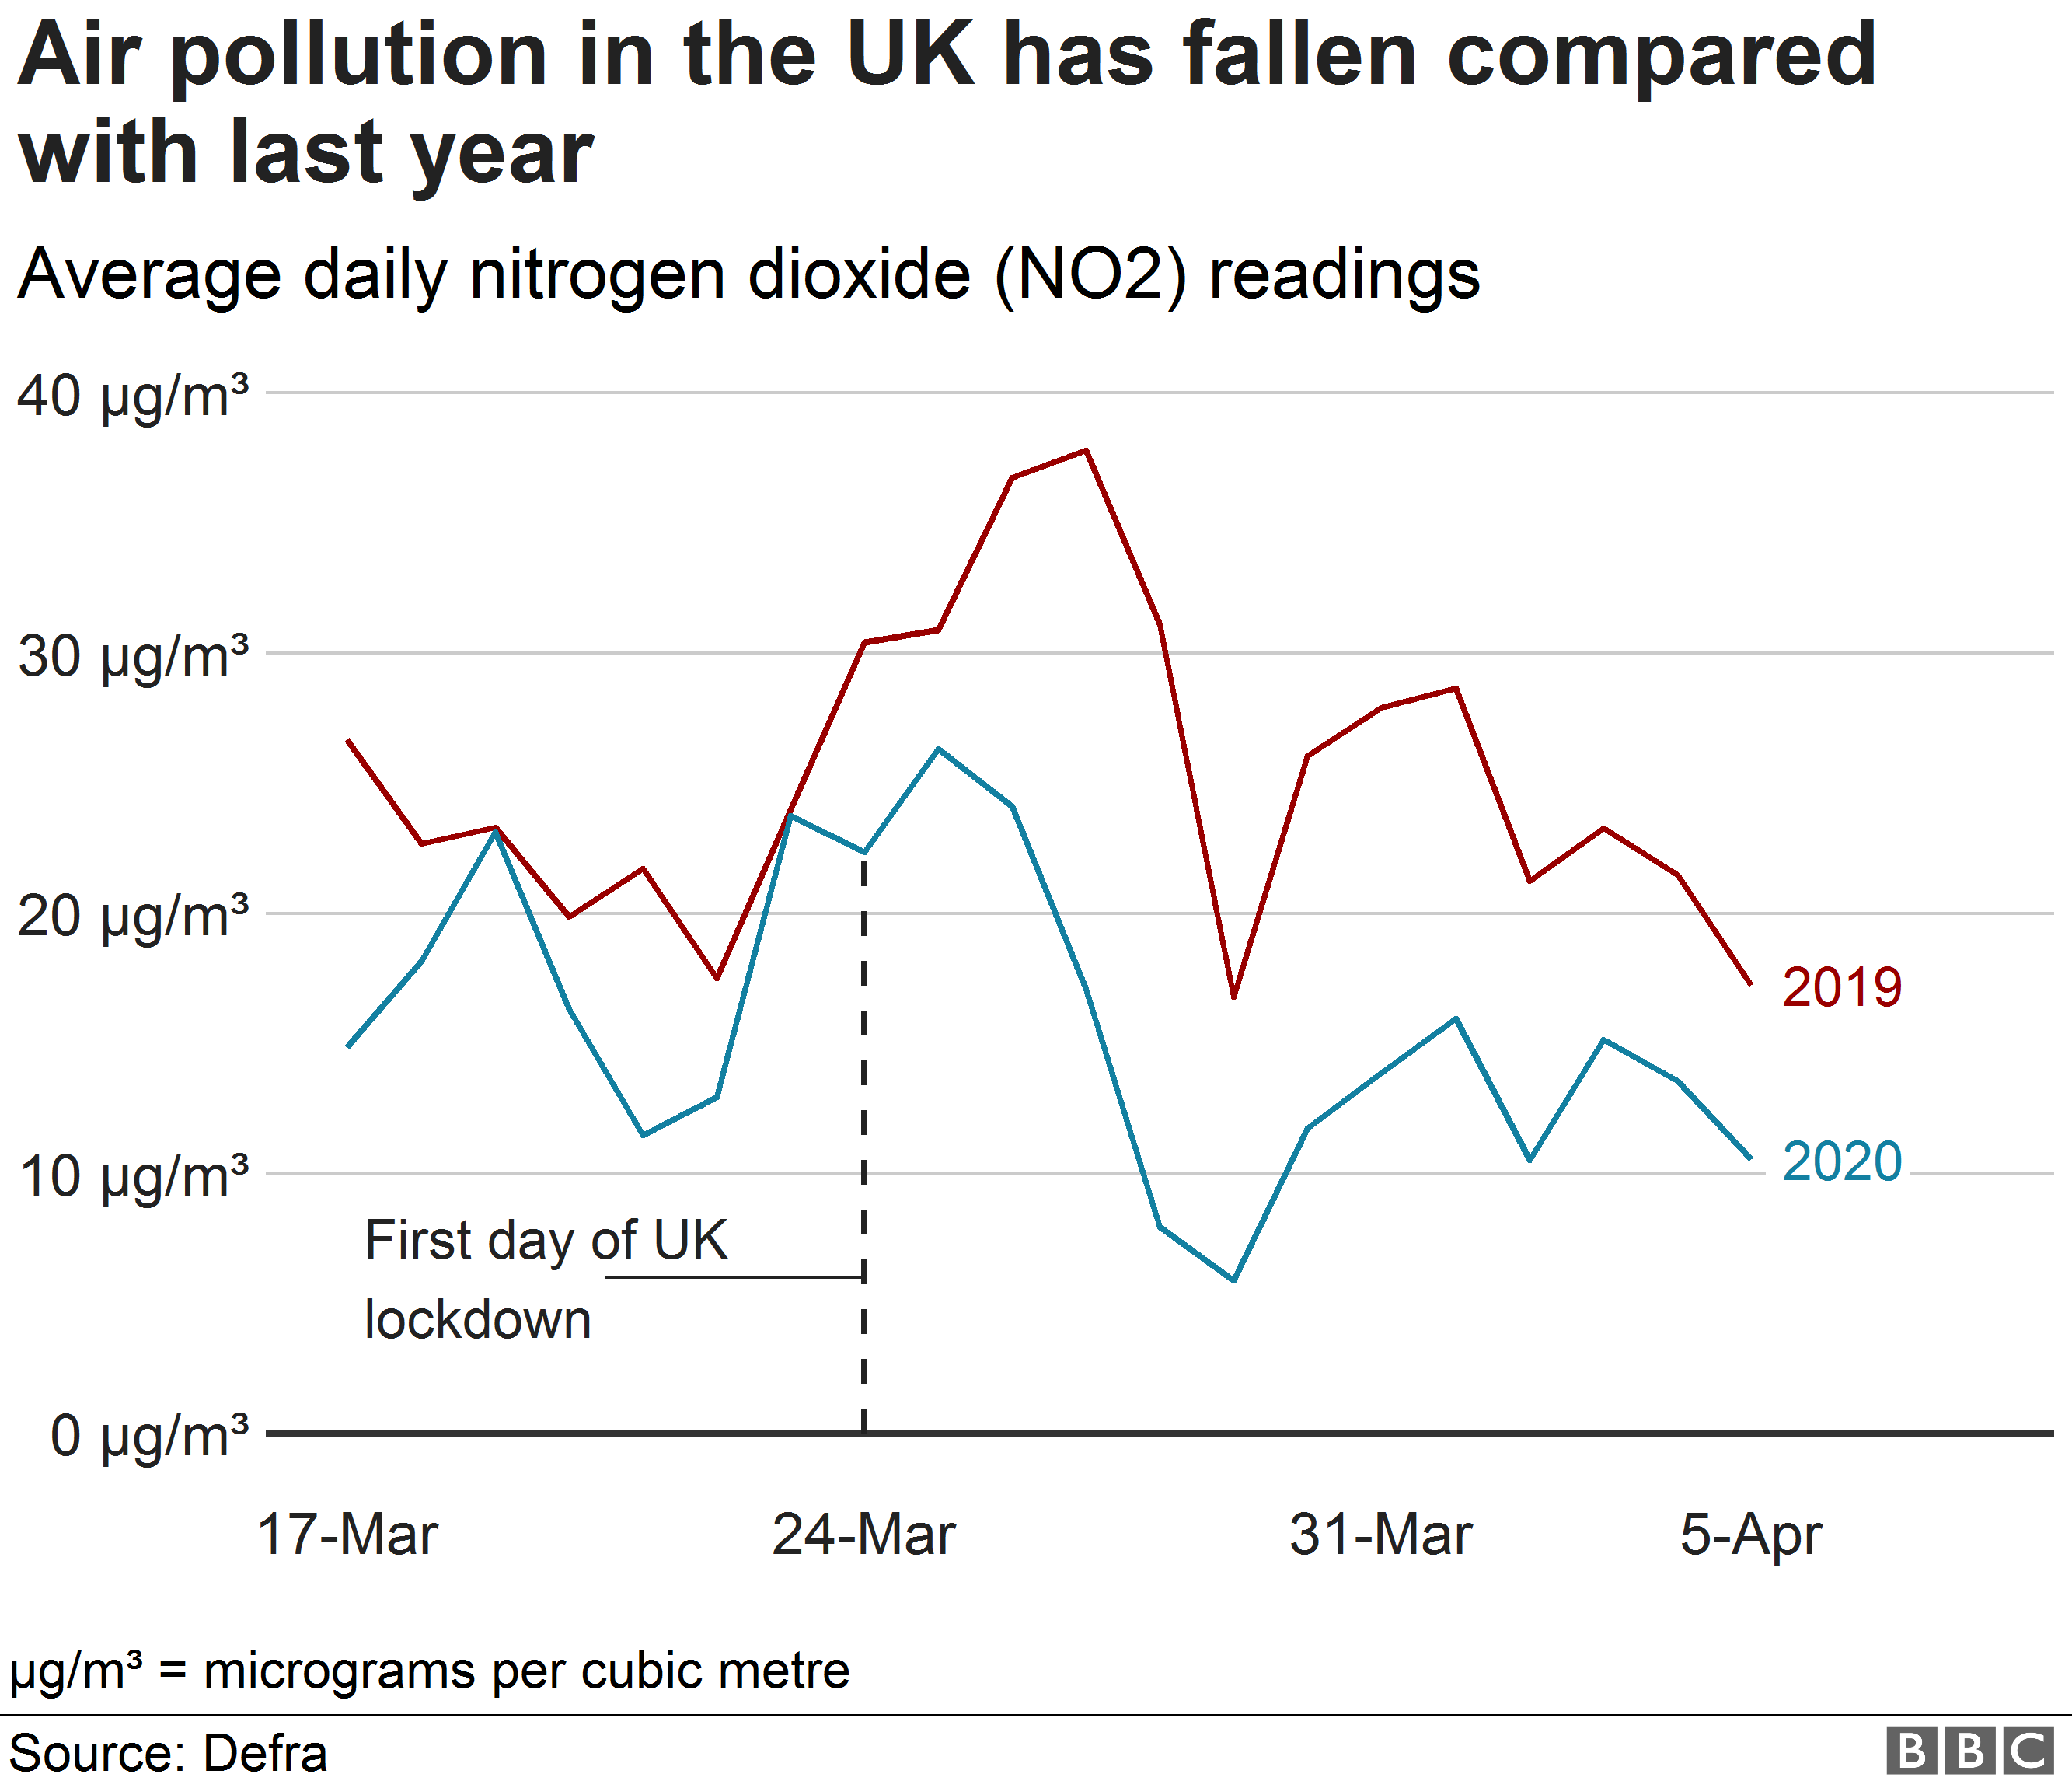 Chart showing the fall in average daily NO2 readings